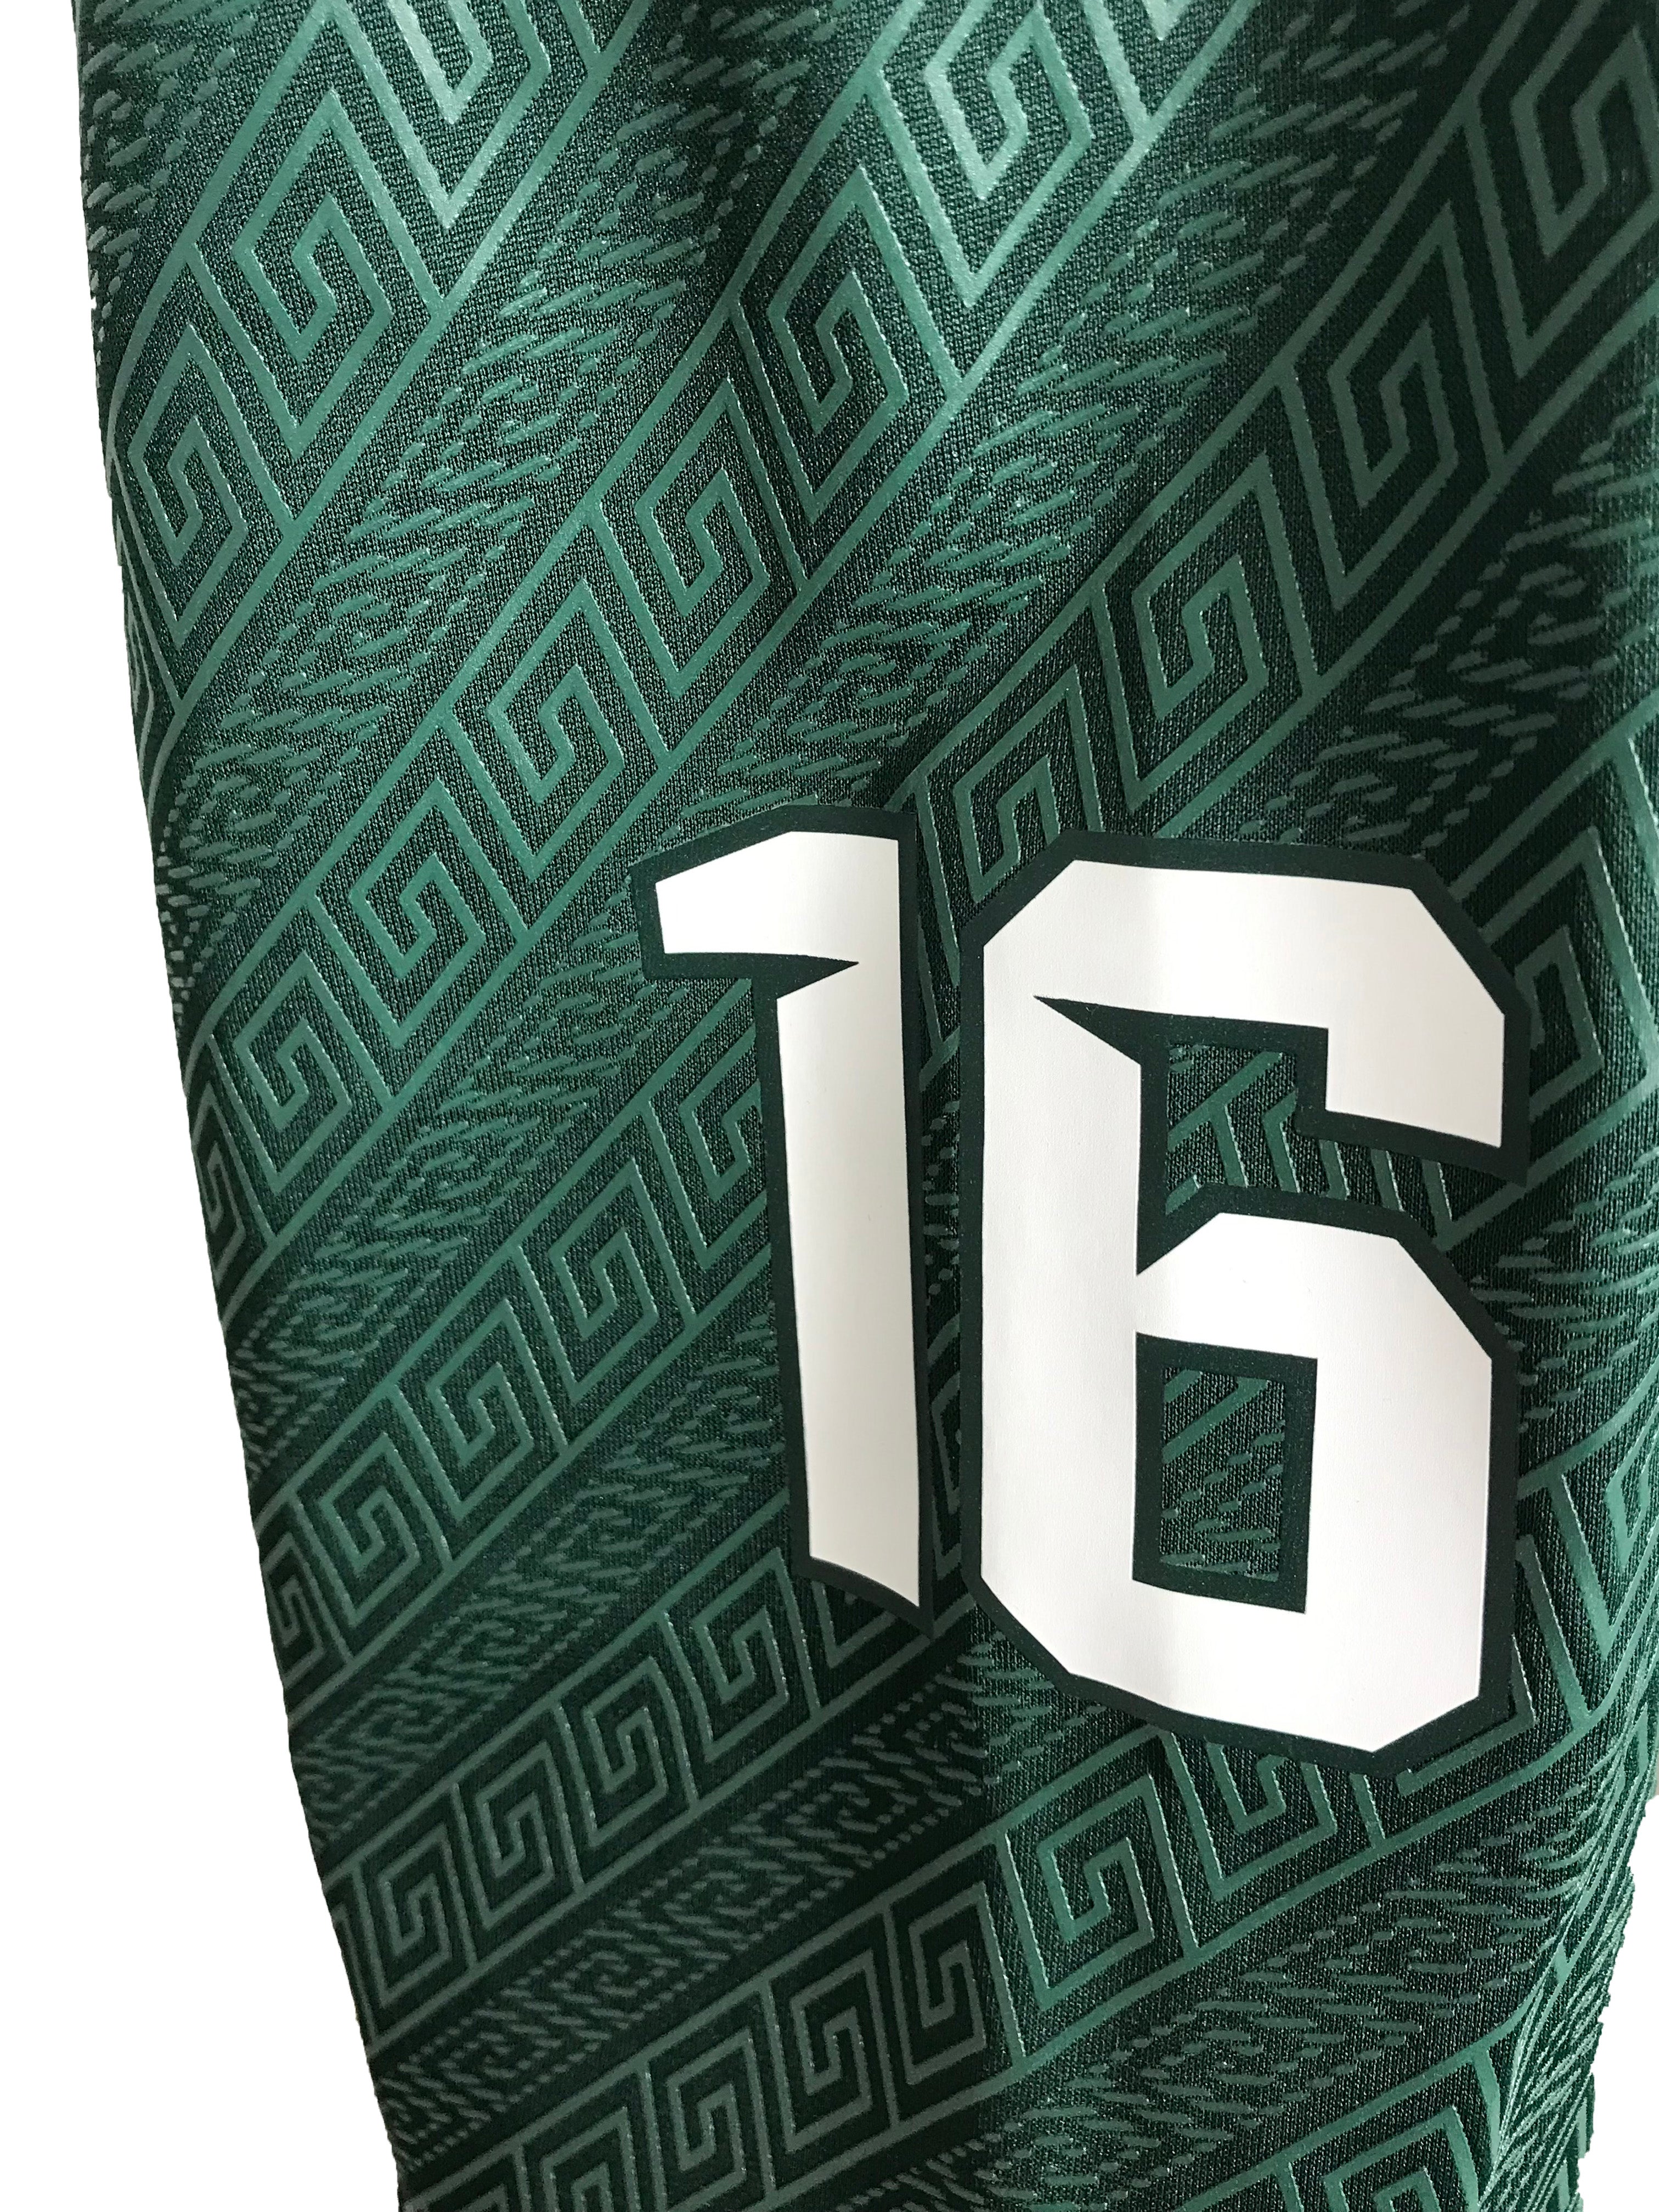 Nike Michigan State Spartans Green #16 Home Game Football Jersey Men's Size 2XL